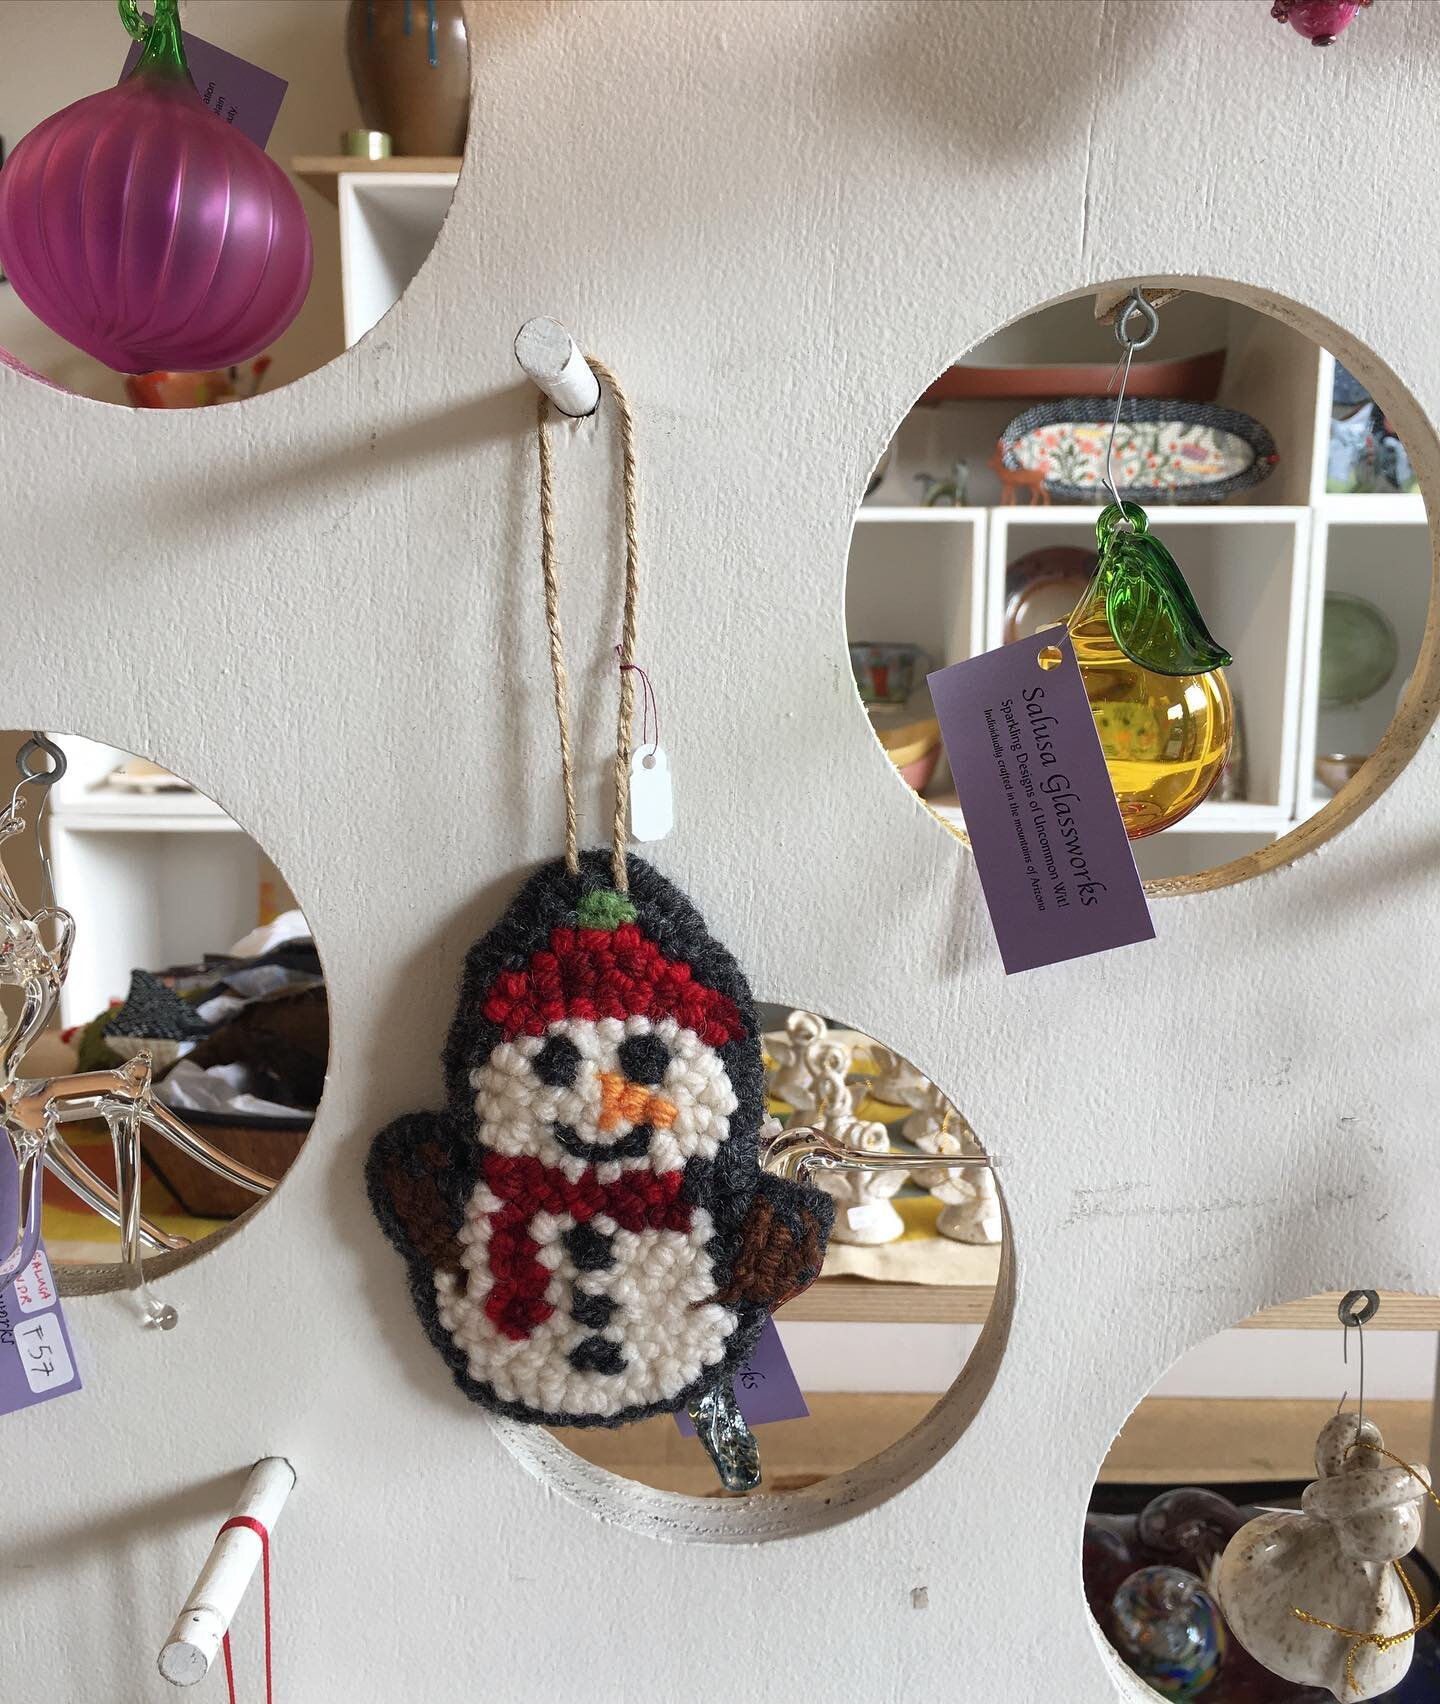 My sweet handmade ornaments are for sale at Freehand Gallery. If you&rsquo;re in Los Angeles, check them out along with all of the amazing gifts they have to offer! Thank you for supporting local artists and small businesses ❤️❤️❤️

#punchneedle #orn